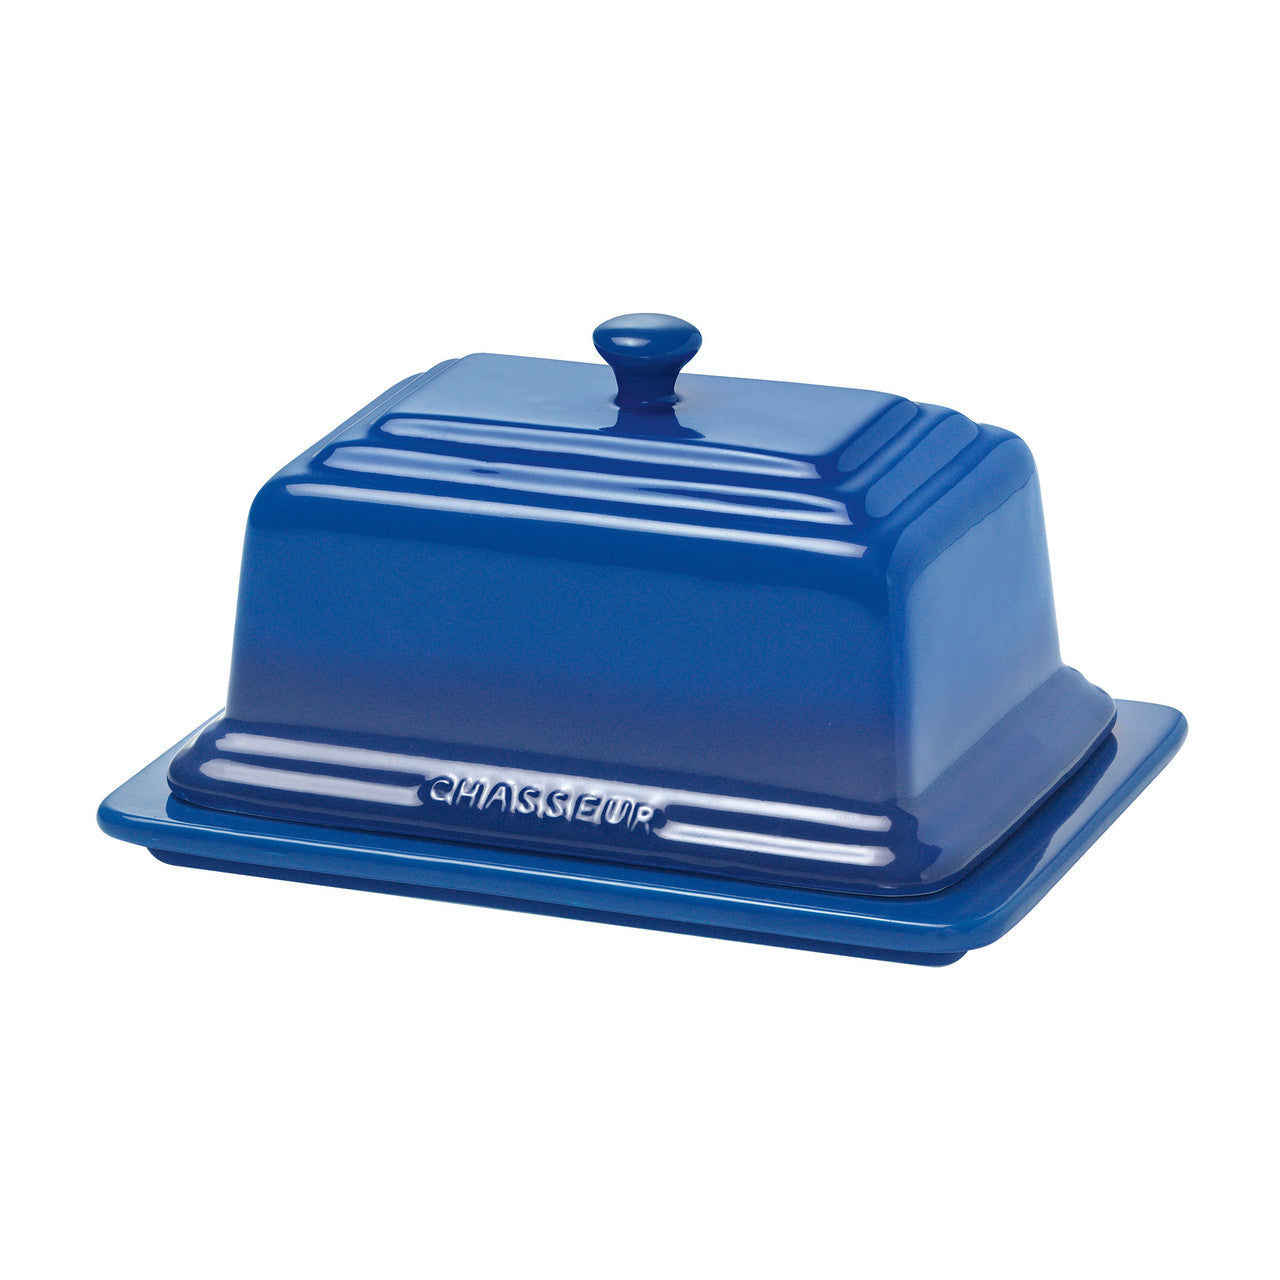 chasseur - BUTTER DISH - BLUE